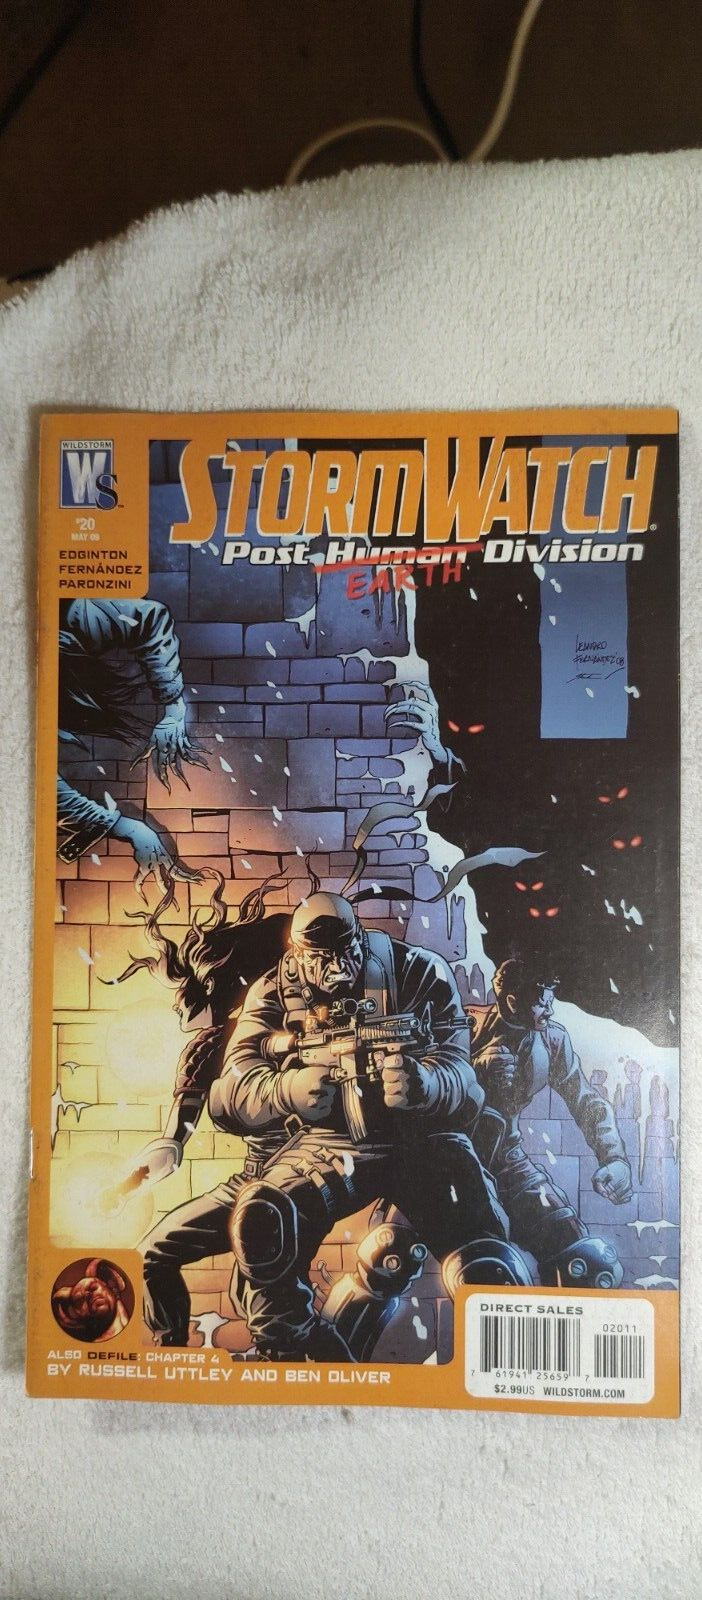 Cb18~comic book~rare stormwatch post earth division issue #20 May \'09